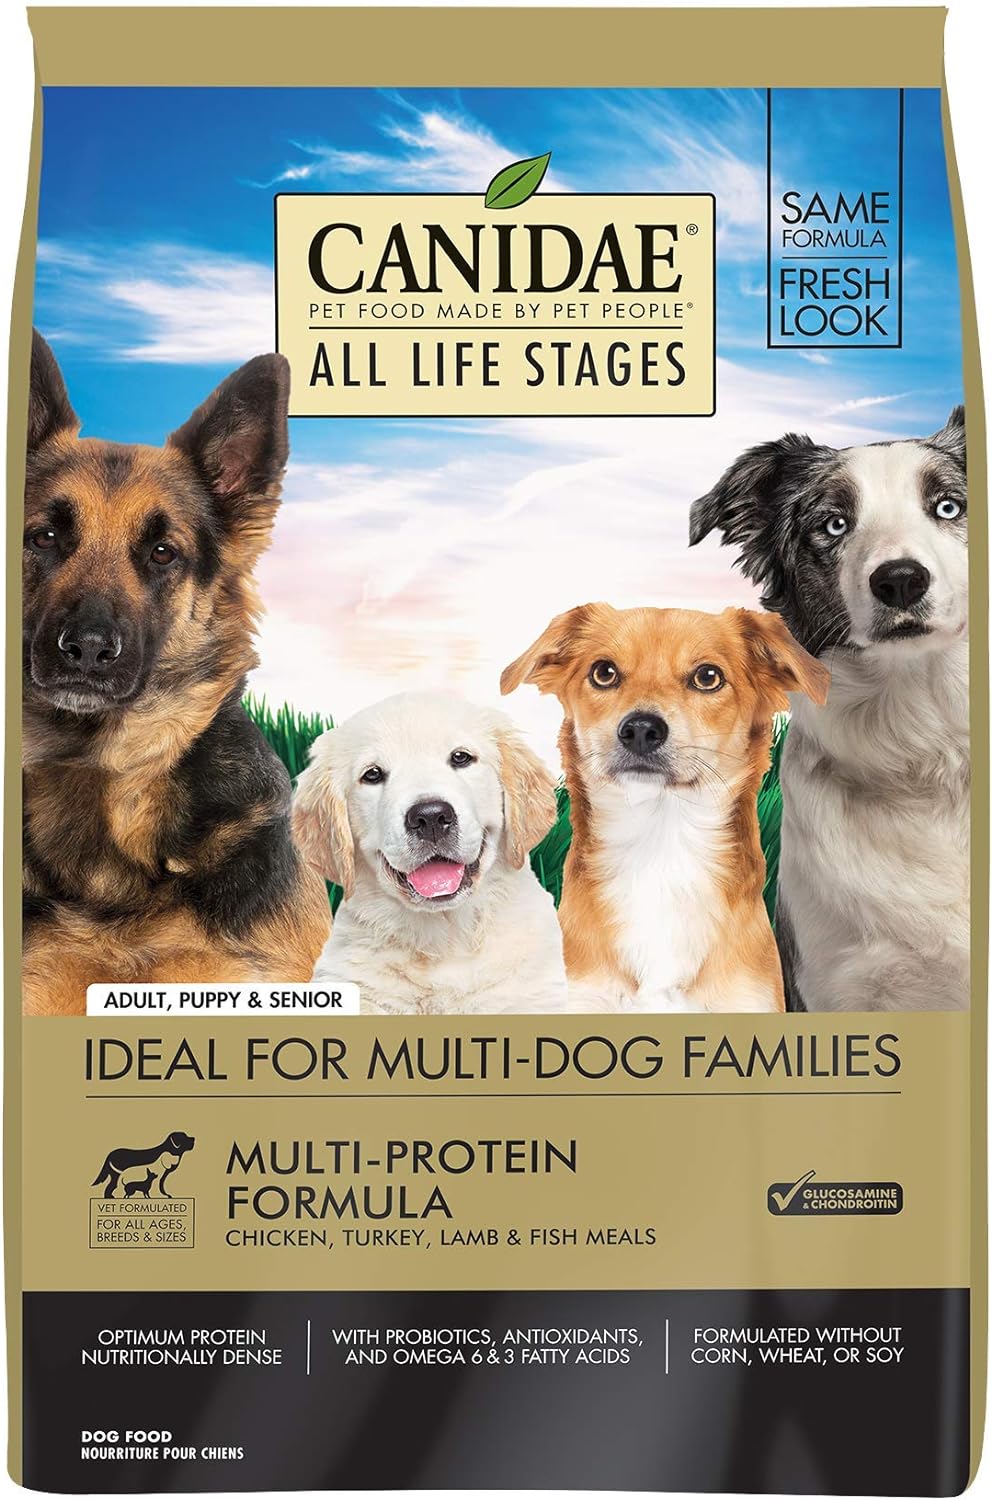 Canidae All Life Stages Multi-Protein Formula Chicken, Turkey, Lamb, and Fish Meals Dry Dog Food – Gallery Image 1